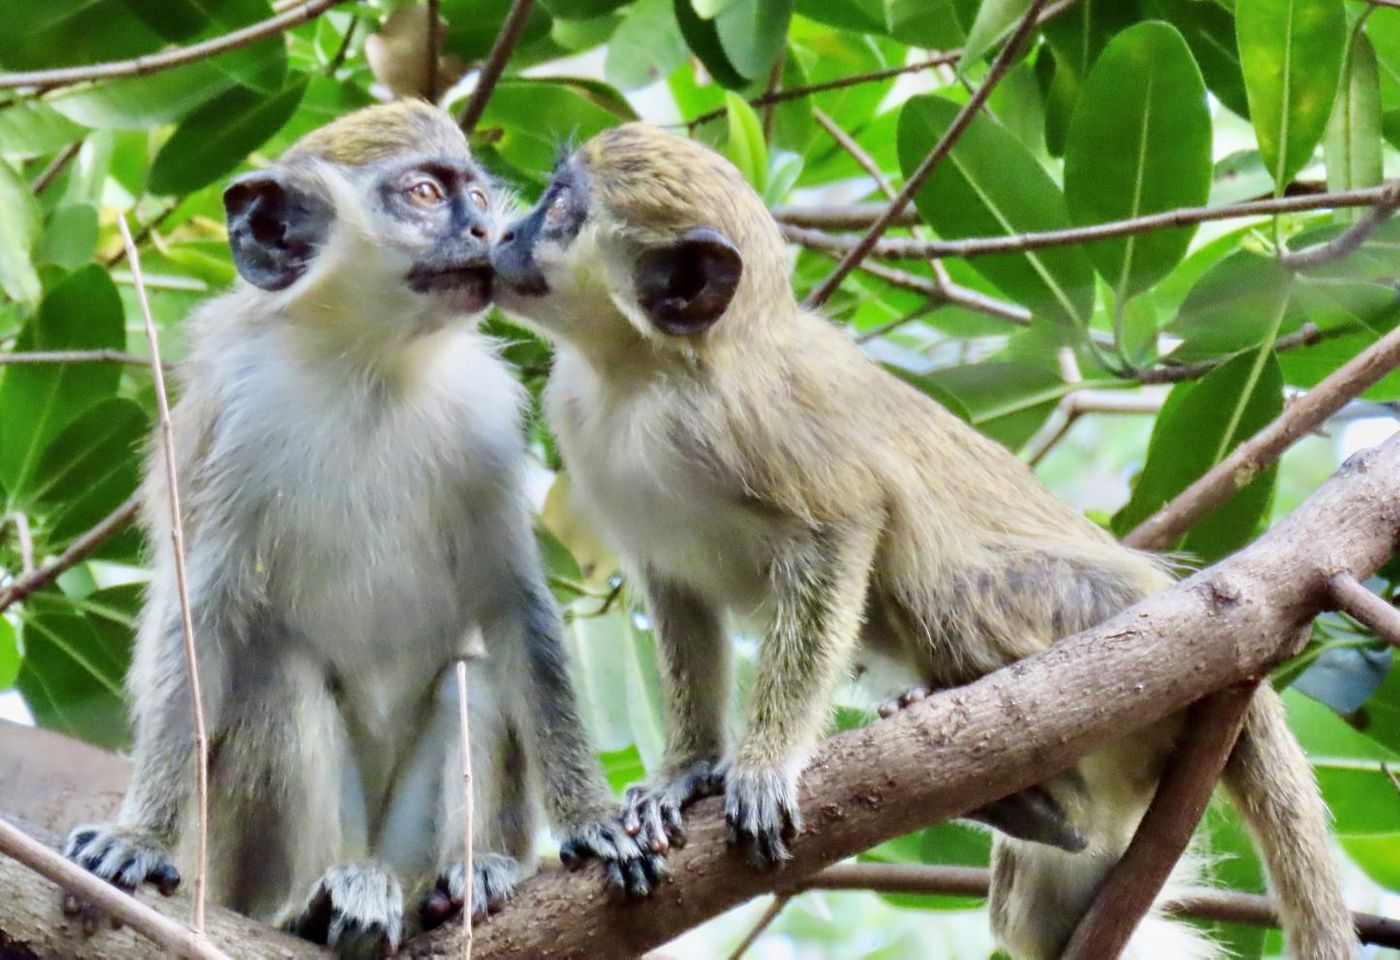 Two vervet monkeys share a kiss in a mangrove forest near the Fort Lauderdale-Hollywood International Airport in South Florida. / Credit: Aaron Mencia